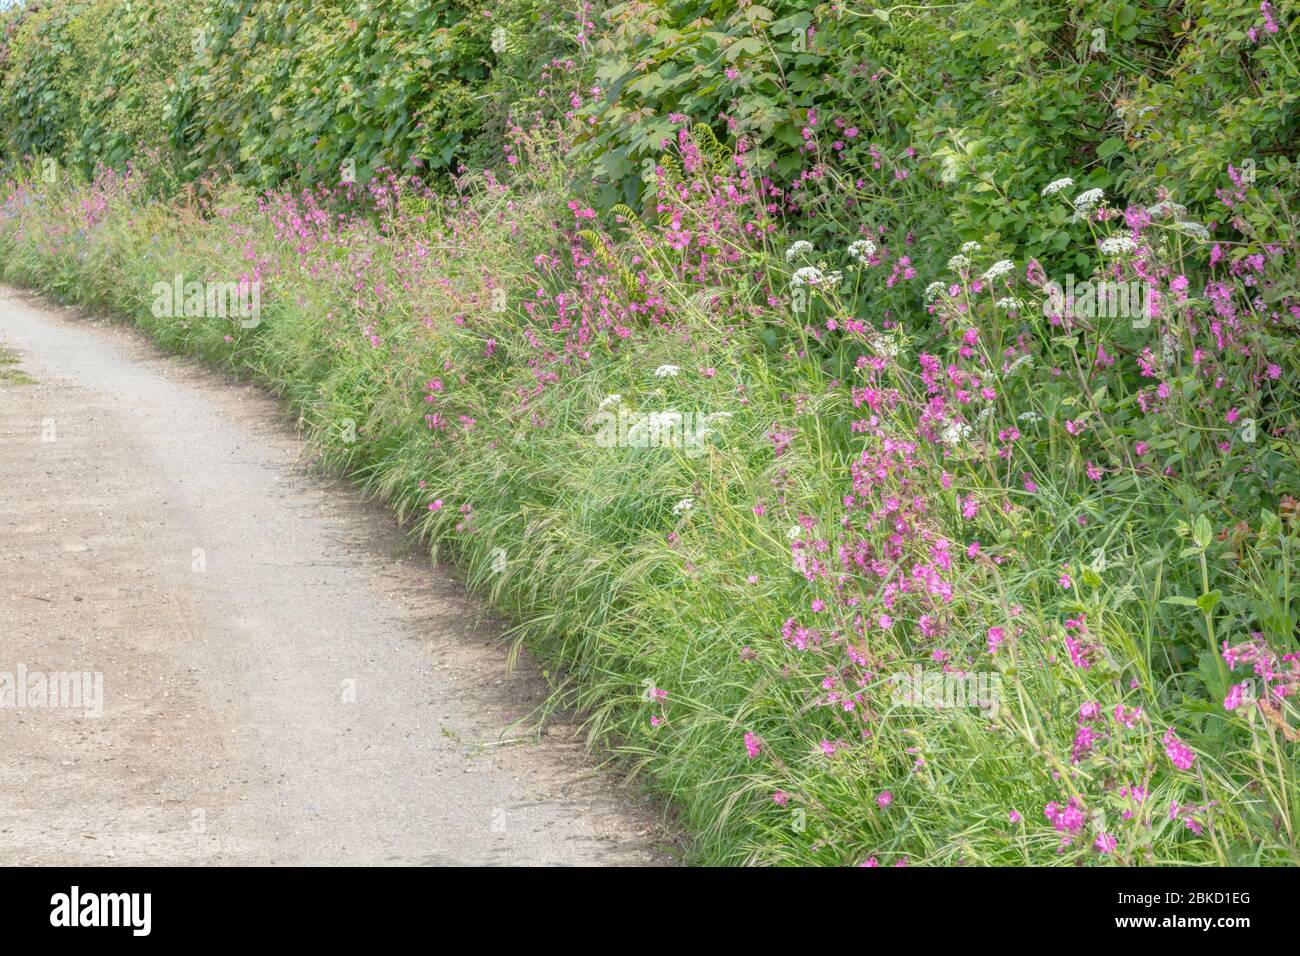 Country road lane with patch of wild flowers growing in hedge bank. Pink ones are Red Campion / Silene dioica, white ones are Cow Parsley. Stock Photo